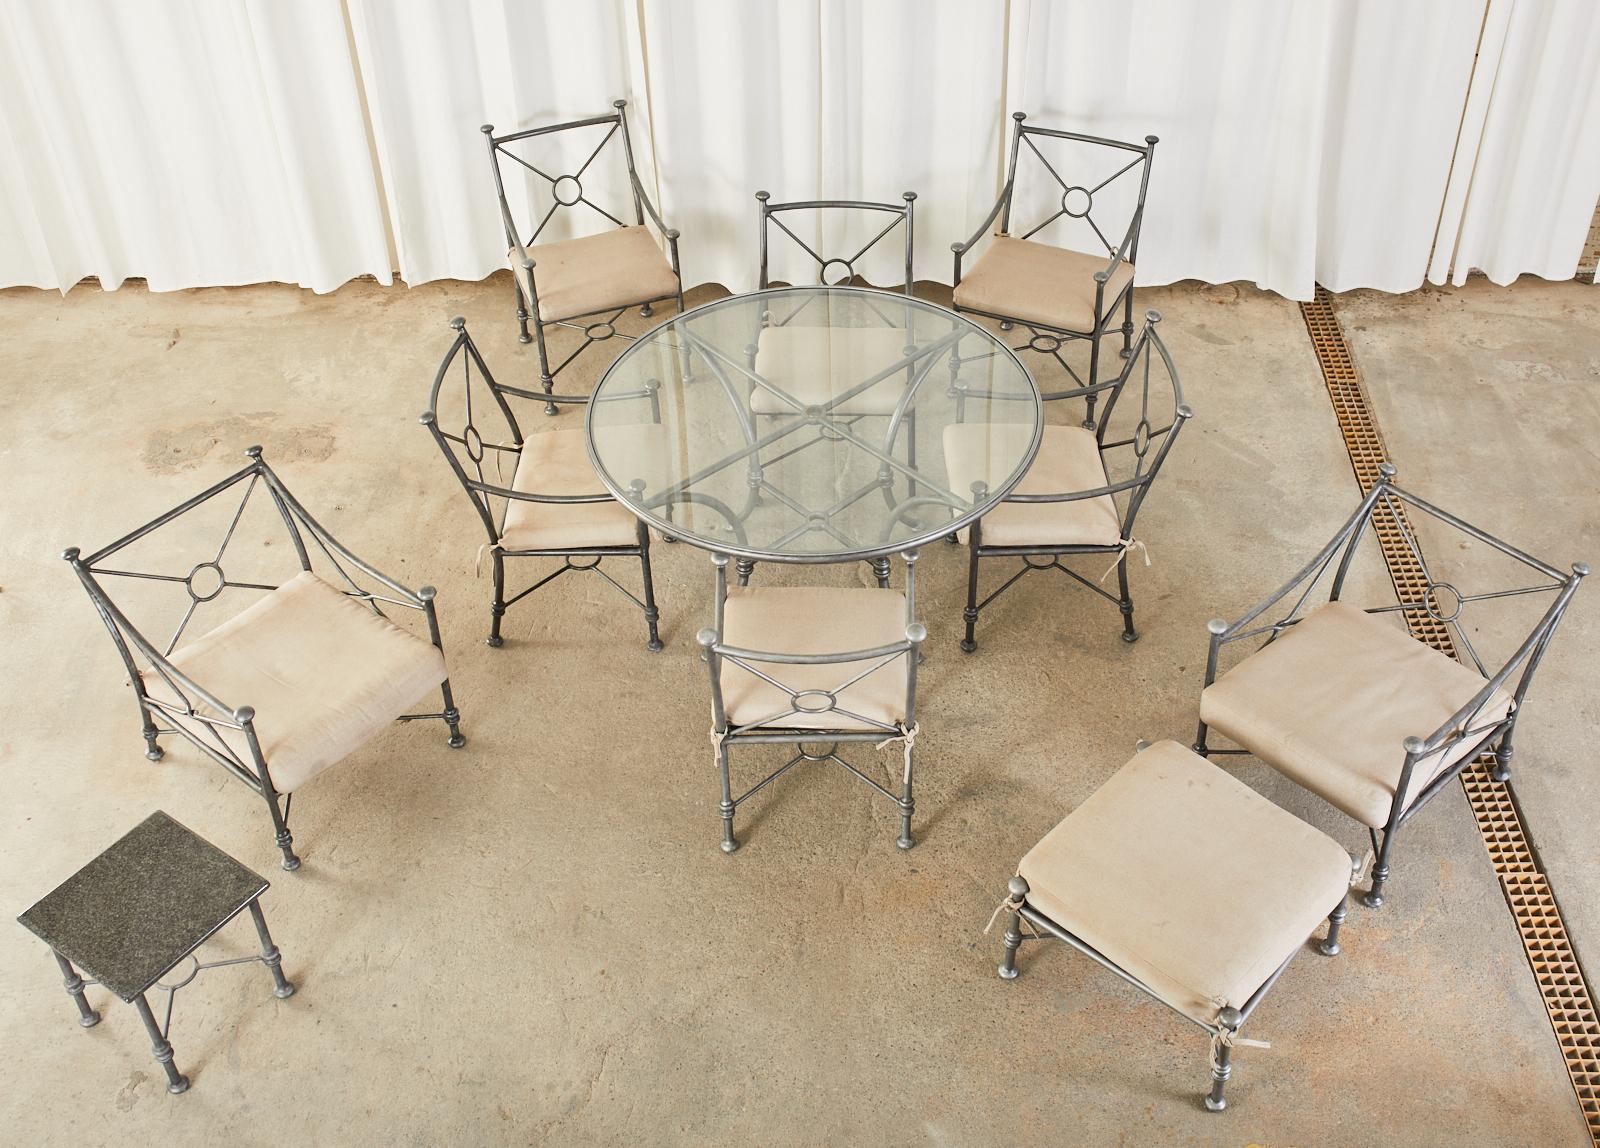 Grand eleven piece set of cast aluminum garden dining patio furniture suite. The large matching set includes six dining armchairs, two lounge chairs with one ottoman, one granite top drinks table, and one round glass dining table. Crafted in the